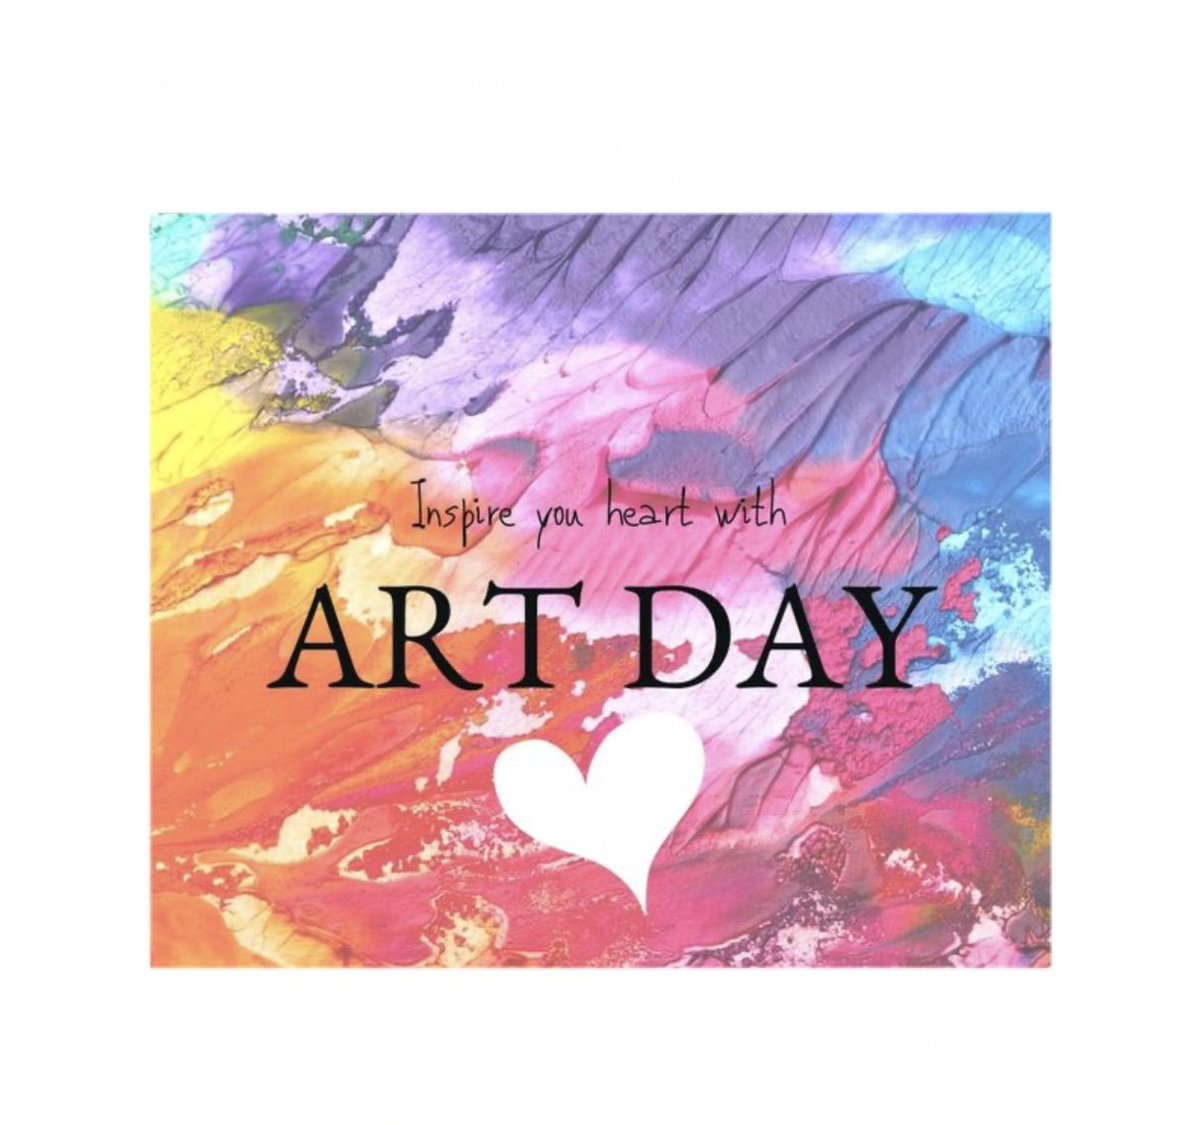 👋Good Wednesday Morning Friends☕️Today is all about finding and enjoying the inspirational things that make your heart happy❤️It’s #InspireYourHeartWithArtDay ❤️Music, Artwork, Books, Movies, etc.🎶🖼️📚Let your favorite artistic passion, broaden your horizon and make you smile❤️